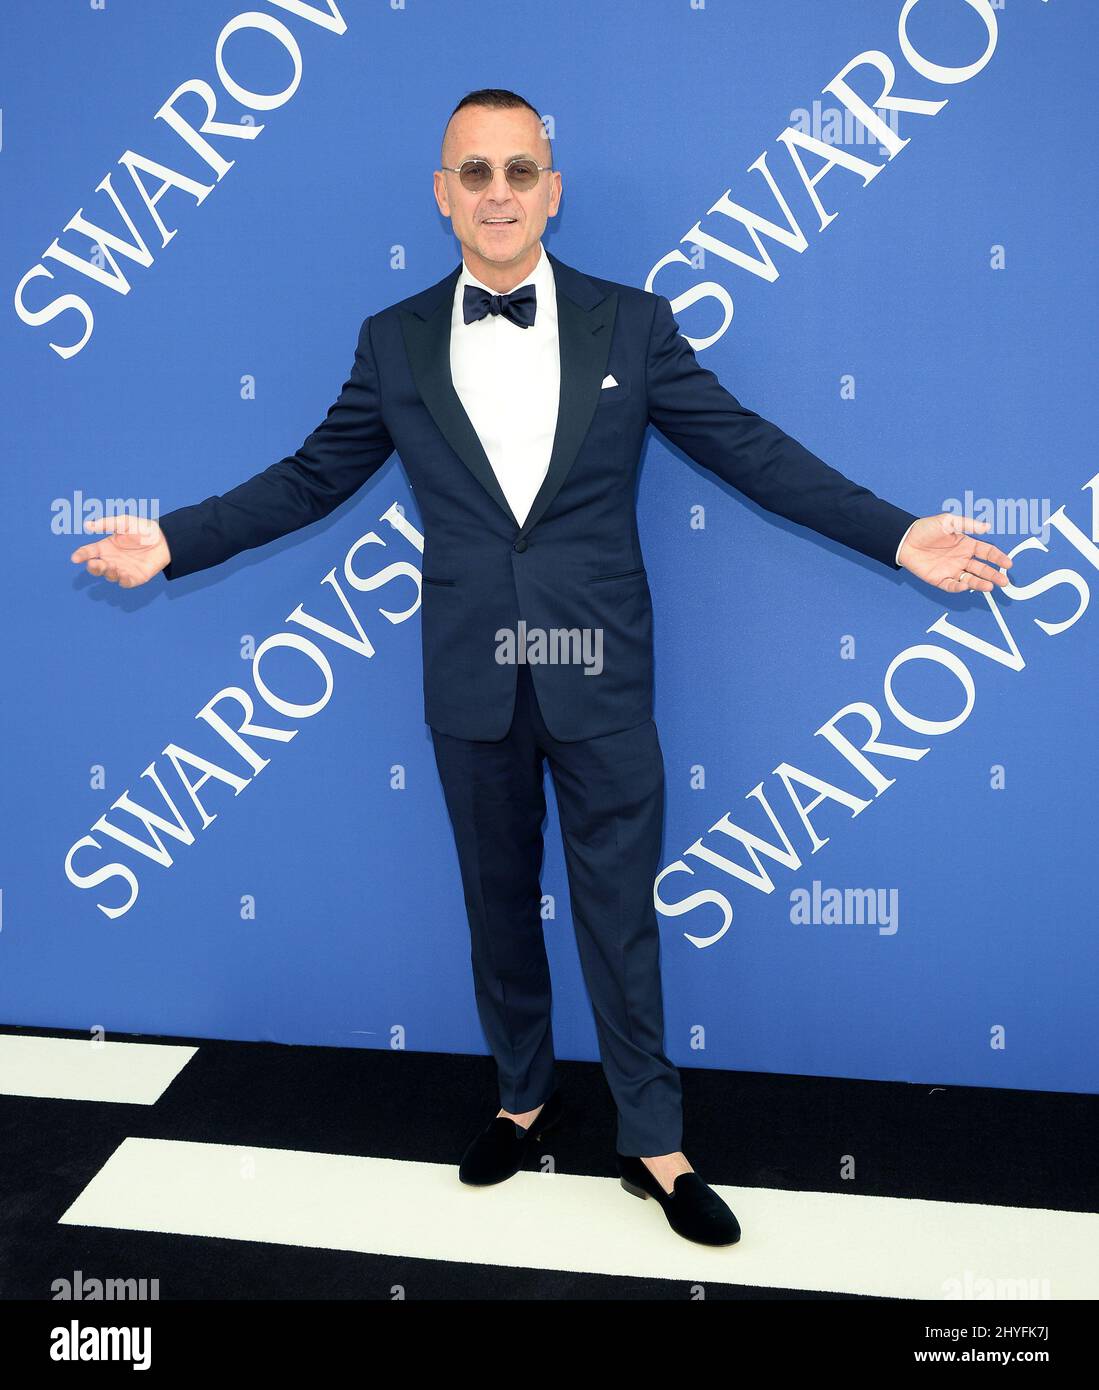 Steven Kolb at the 2018 CFDA Fashion Awards held at the Brooklyn Museum on June 4, 2018 in Brooklyn, NY Stock Photo